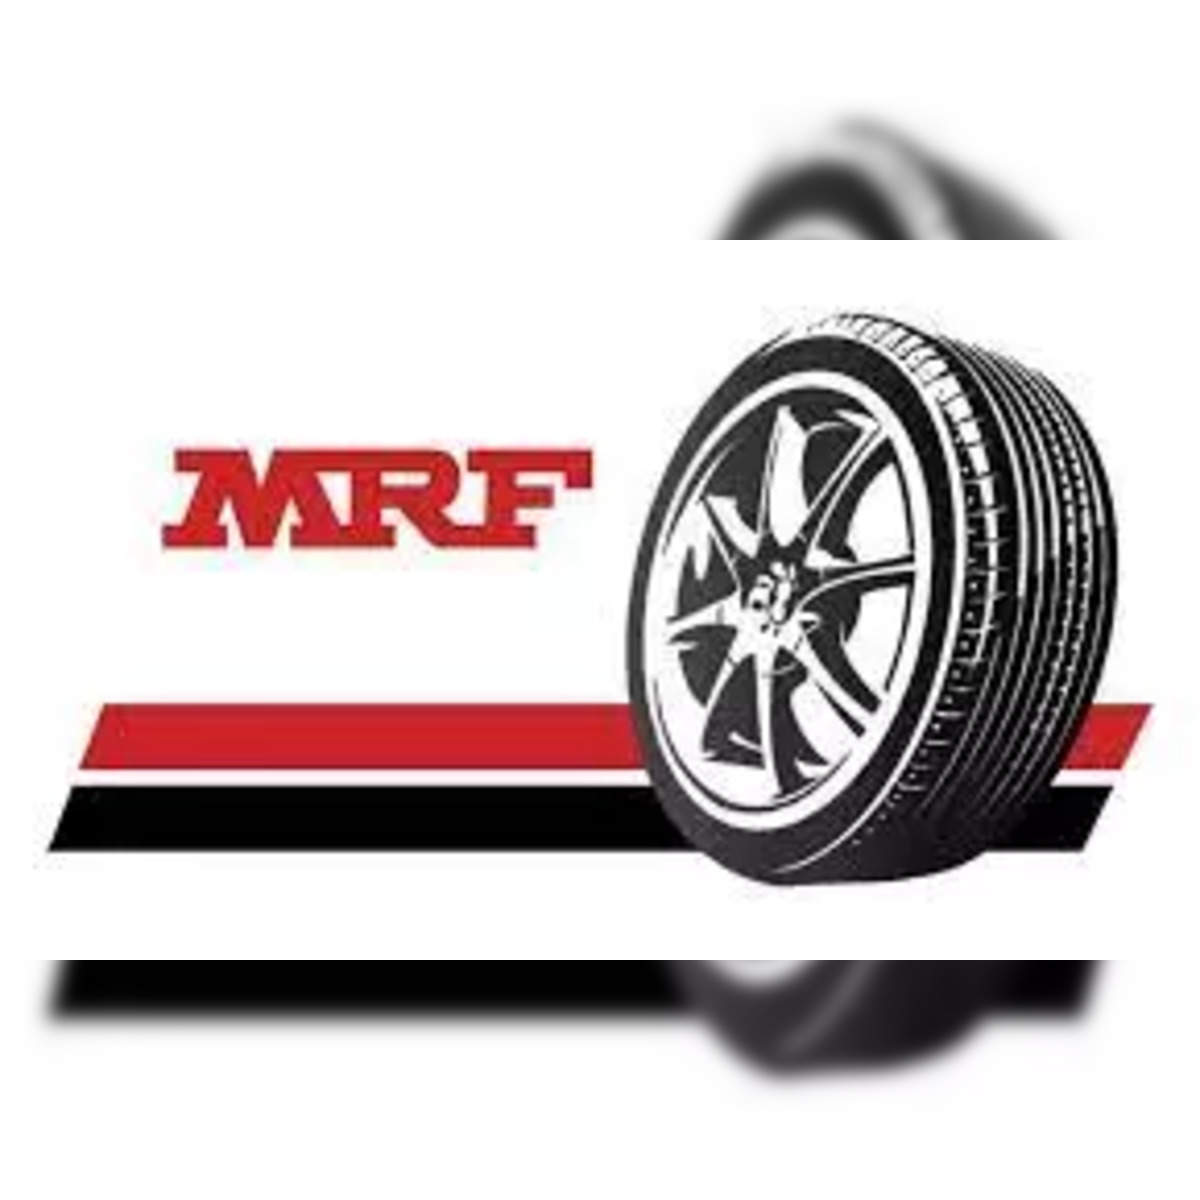 MRF launches ZSPORT World Cup Limited edition tyre - The Economic Times